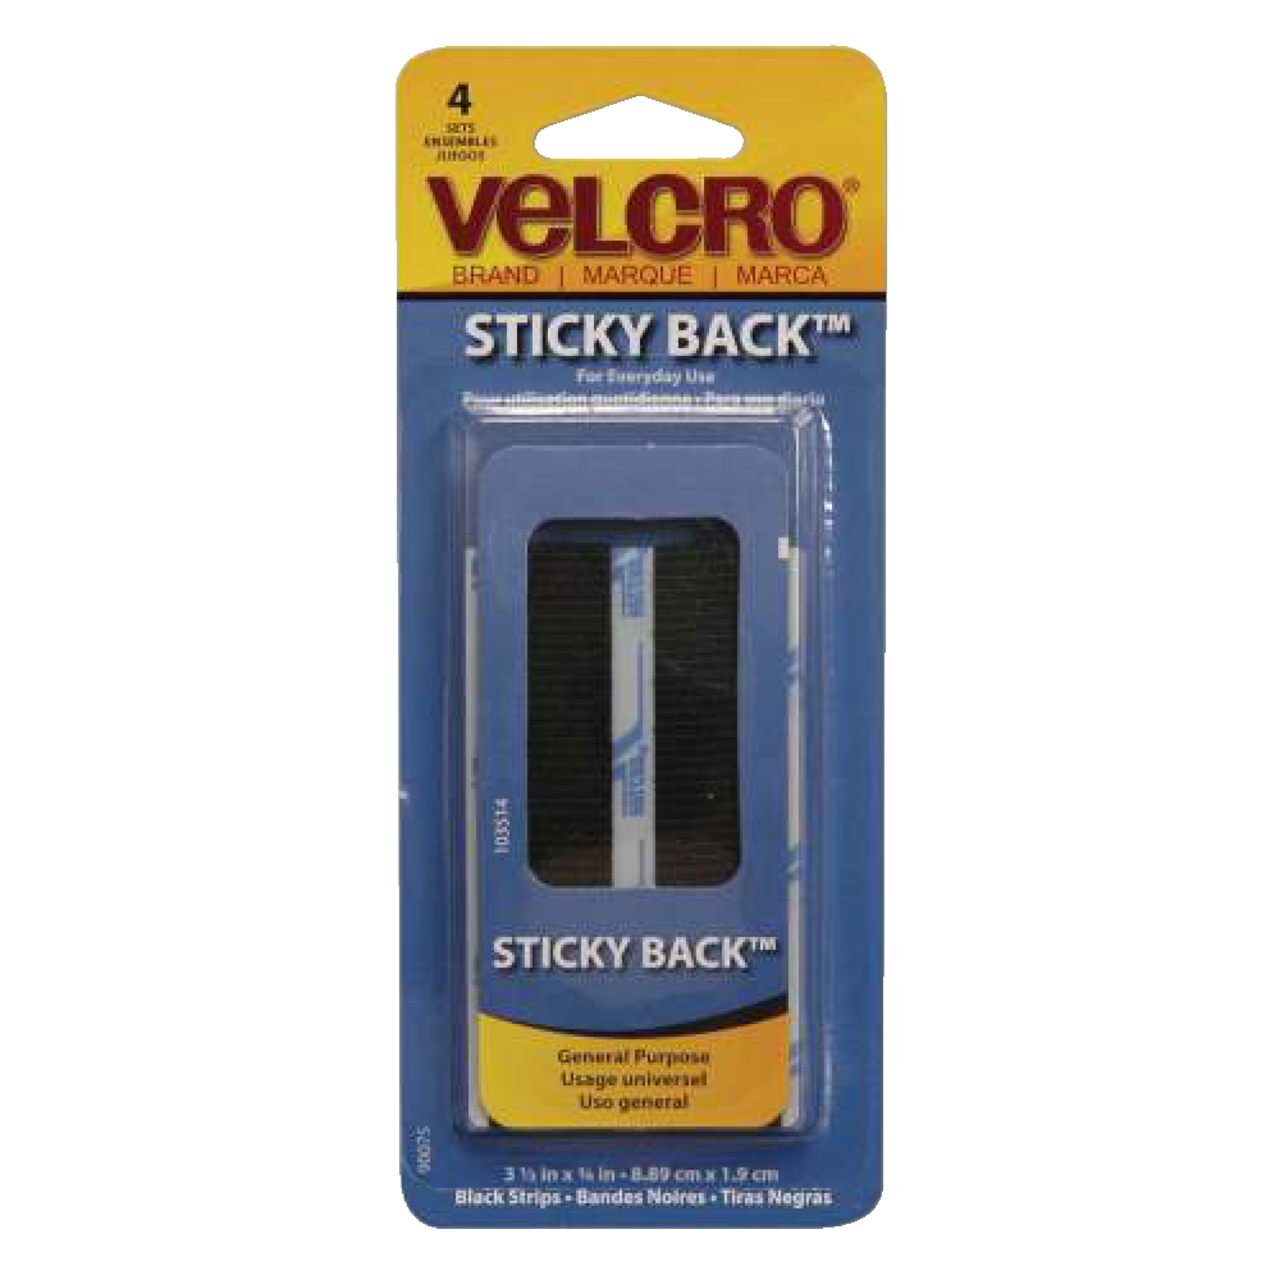 VELCRO Brand Sticky Back Strips with Adhesive, 4 Count, Black 3 1/2 x 3/4  In